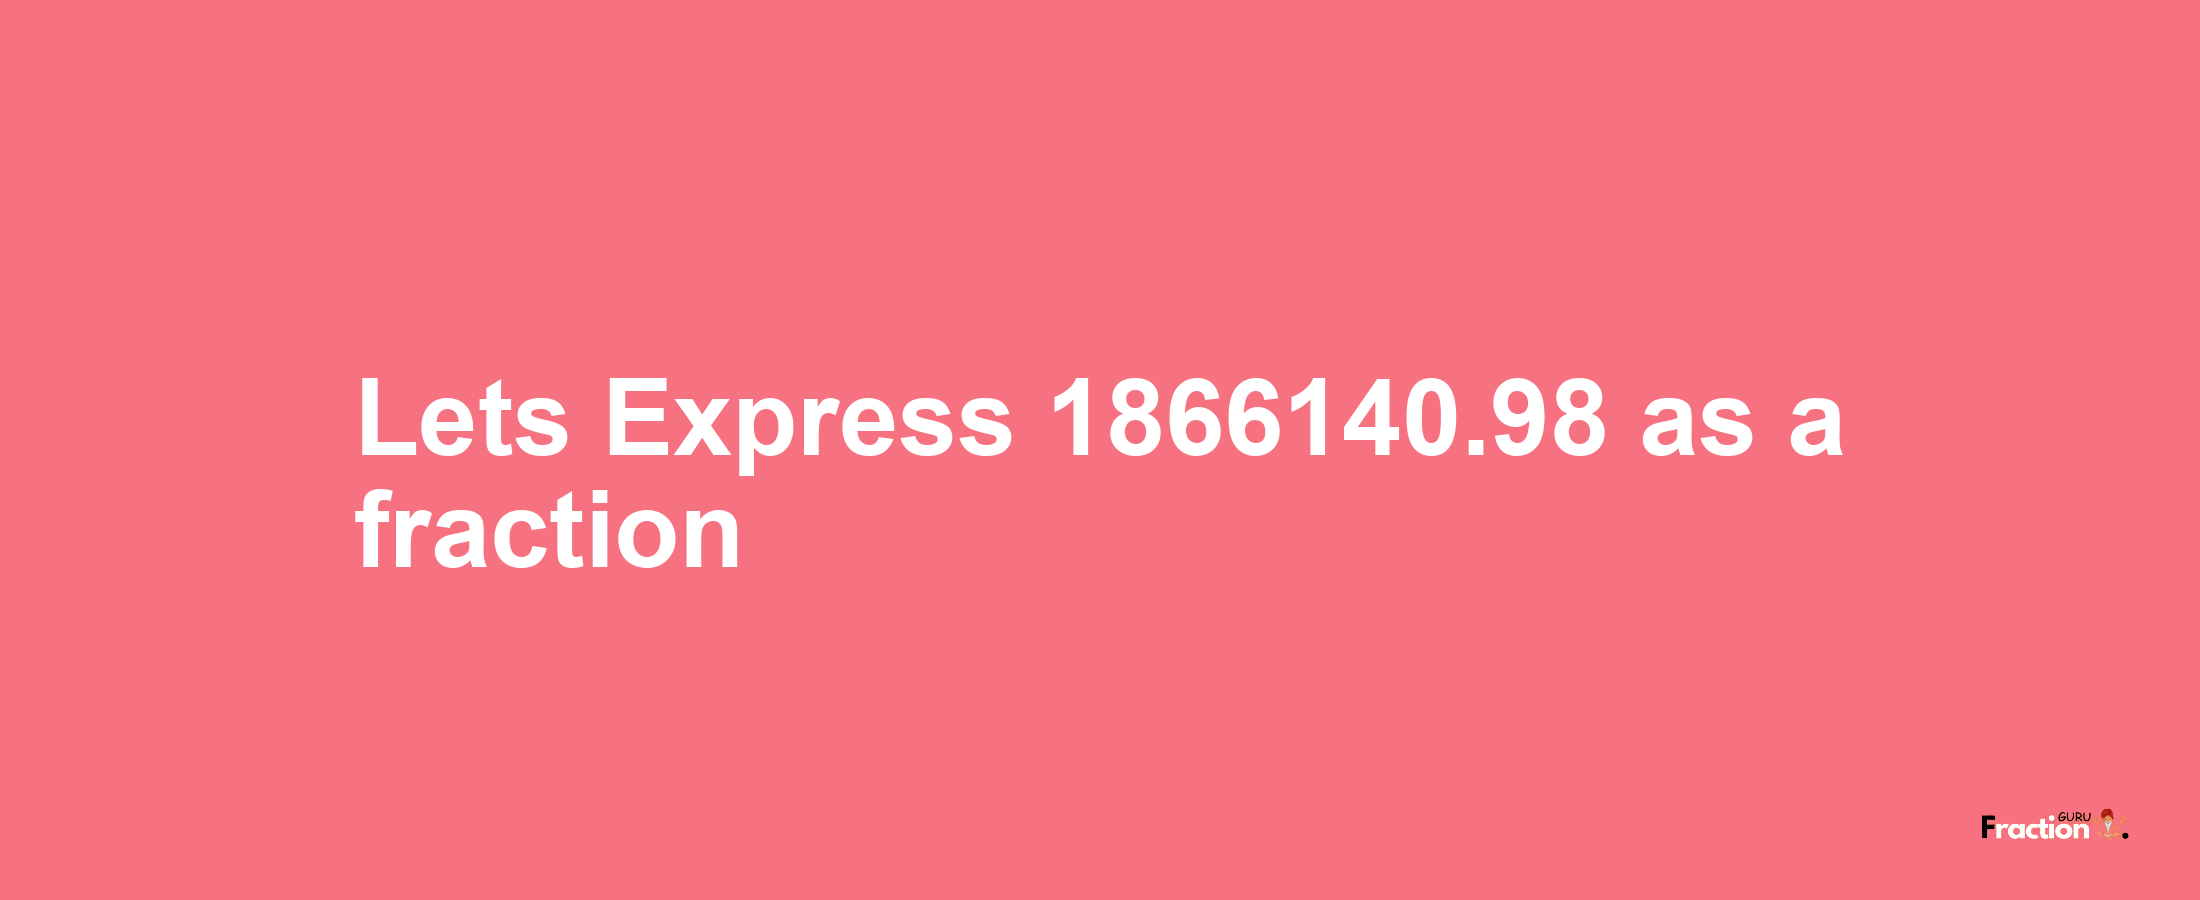 Lets Express 1866140.98 as afraction